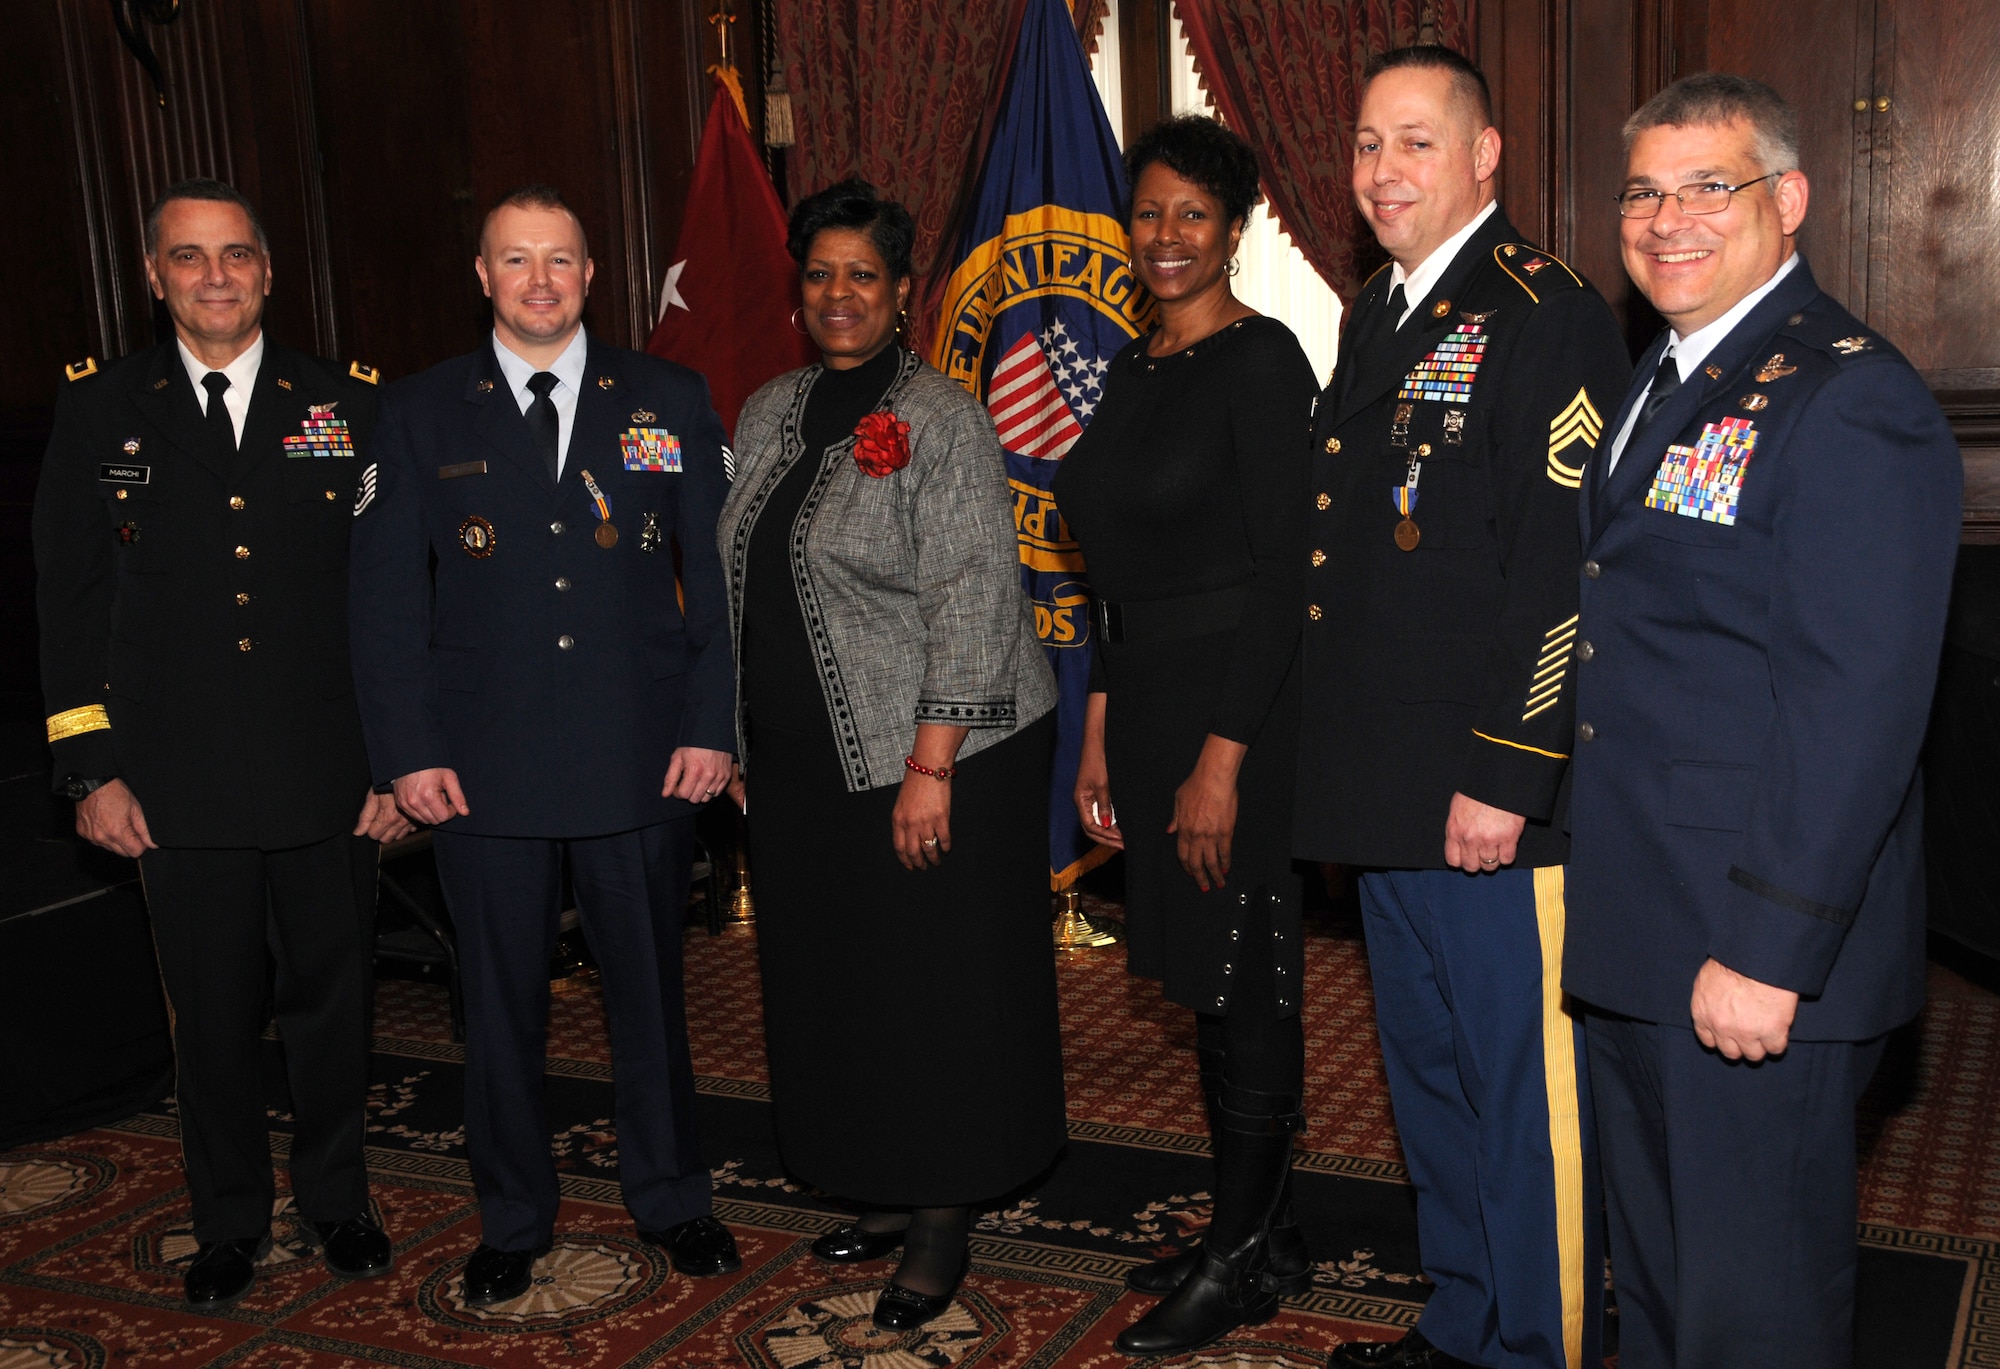 Pa. Deputy Adjutant General-Army, Maj. Gen. Randall R. Marchi (left), Tech. Sgt. Kevin Watson, recruiter, 111th Fighter Wing, Phyllis Brantley, chief of diversity and special programs with the National Guard Bureau, Chief Master Sgt. (ret.) Melvene Lanier, Sgt. 1st Class Bruce E. Facer, Sr., readiness non-commissioned officer, Bravo Company, 628th Aviation Support Battalion and Pa. Deputy Adjutant General-Air, Col. Anthony J. Carrelli gather at the close of the 2013 Octavius V. Catto Medal held at the Union League in Philadelphia on Feb. 23.